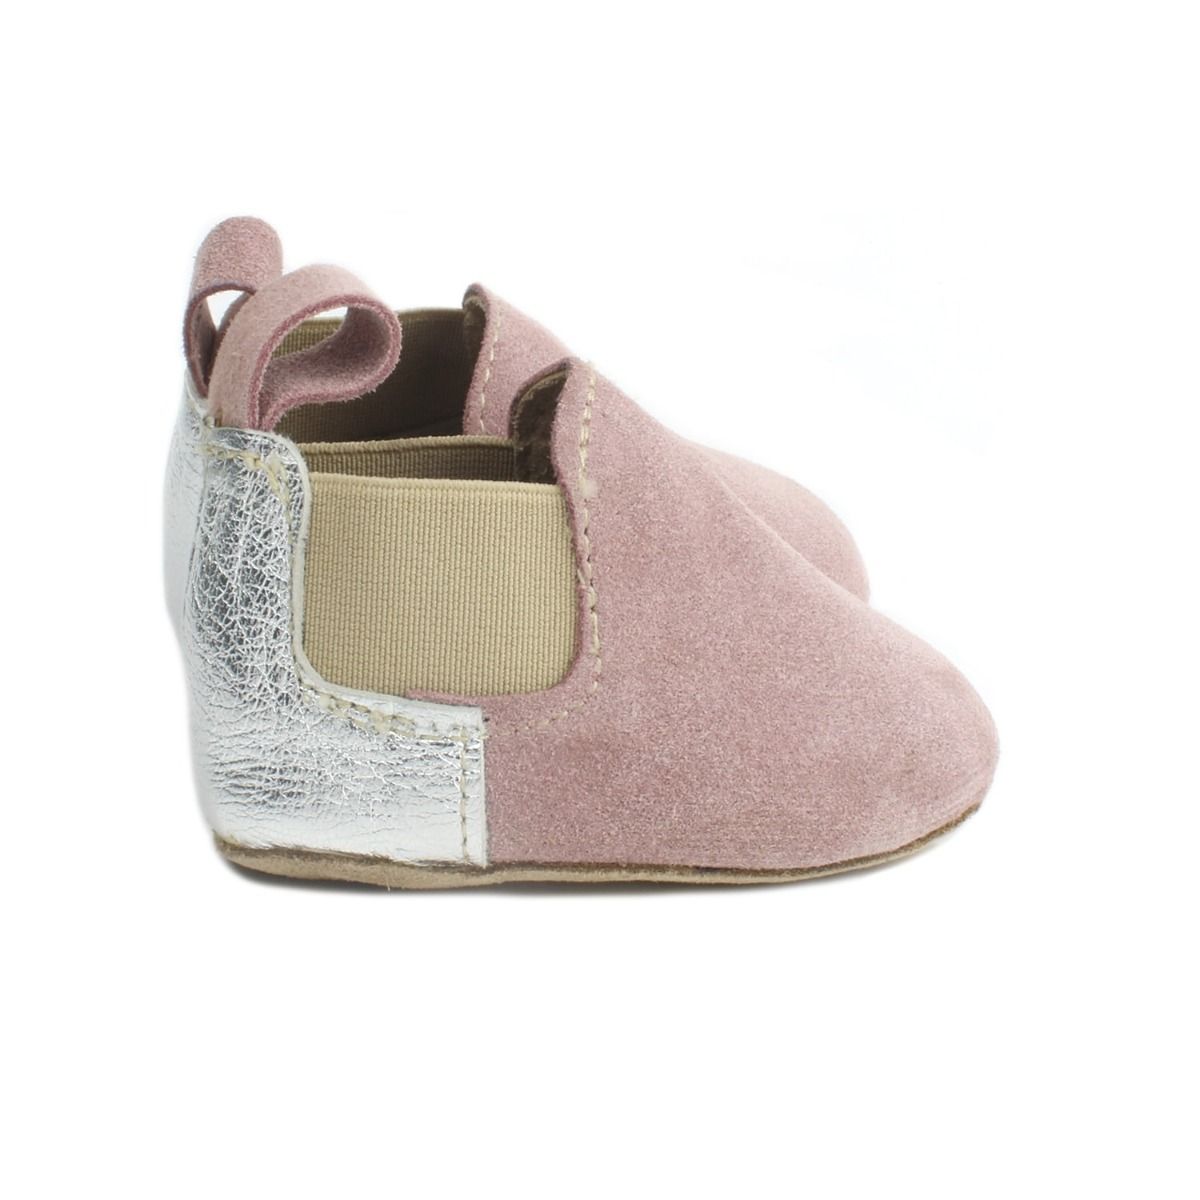 Baby boots in pale pink suede with silver panel on the heel